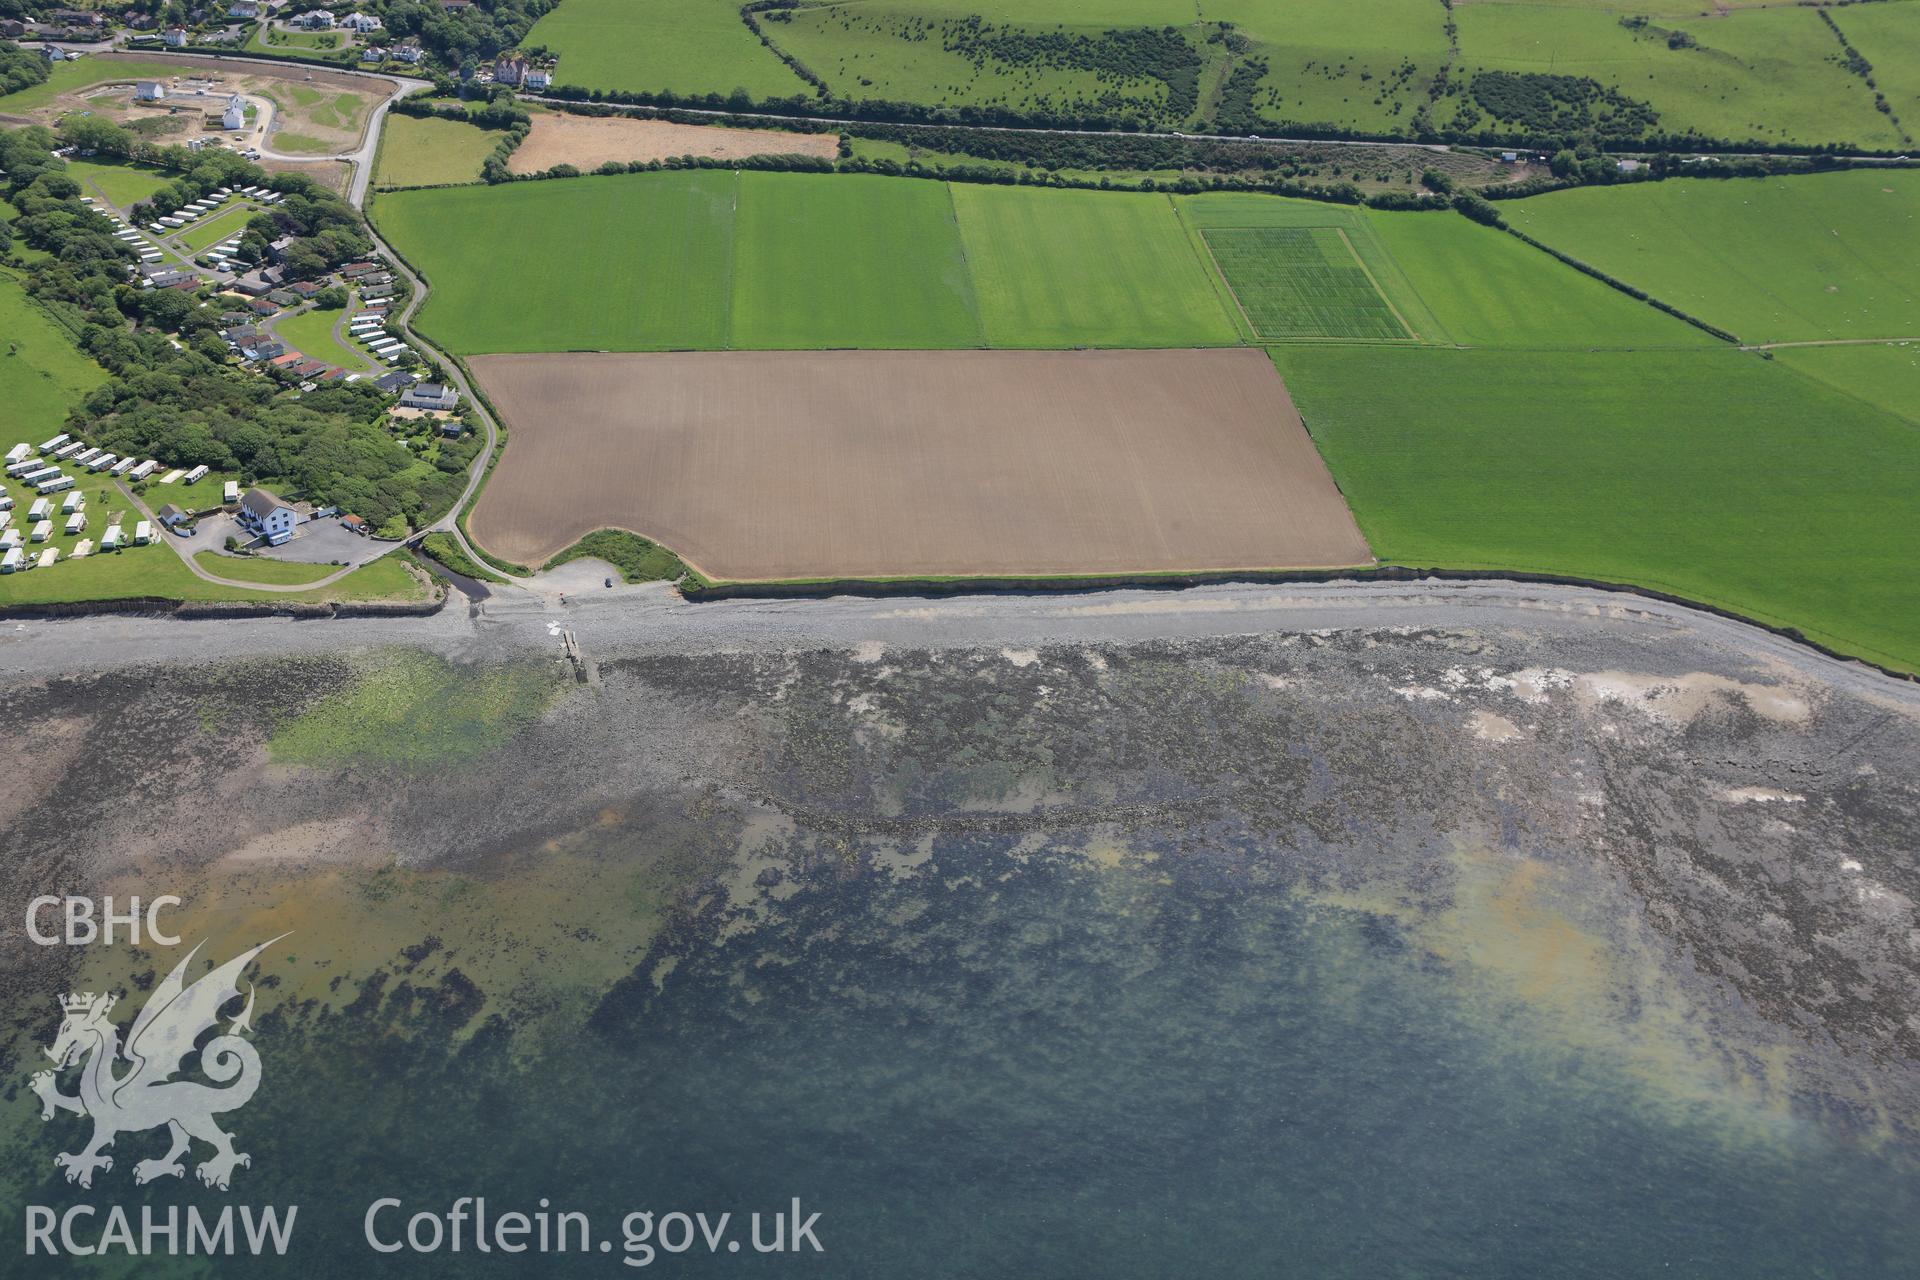 RCAHMW colour oblique aerial photograph of Llanon foreshore and Fishtraps. Taken on 02 June 2009 by Toby Driver